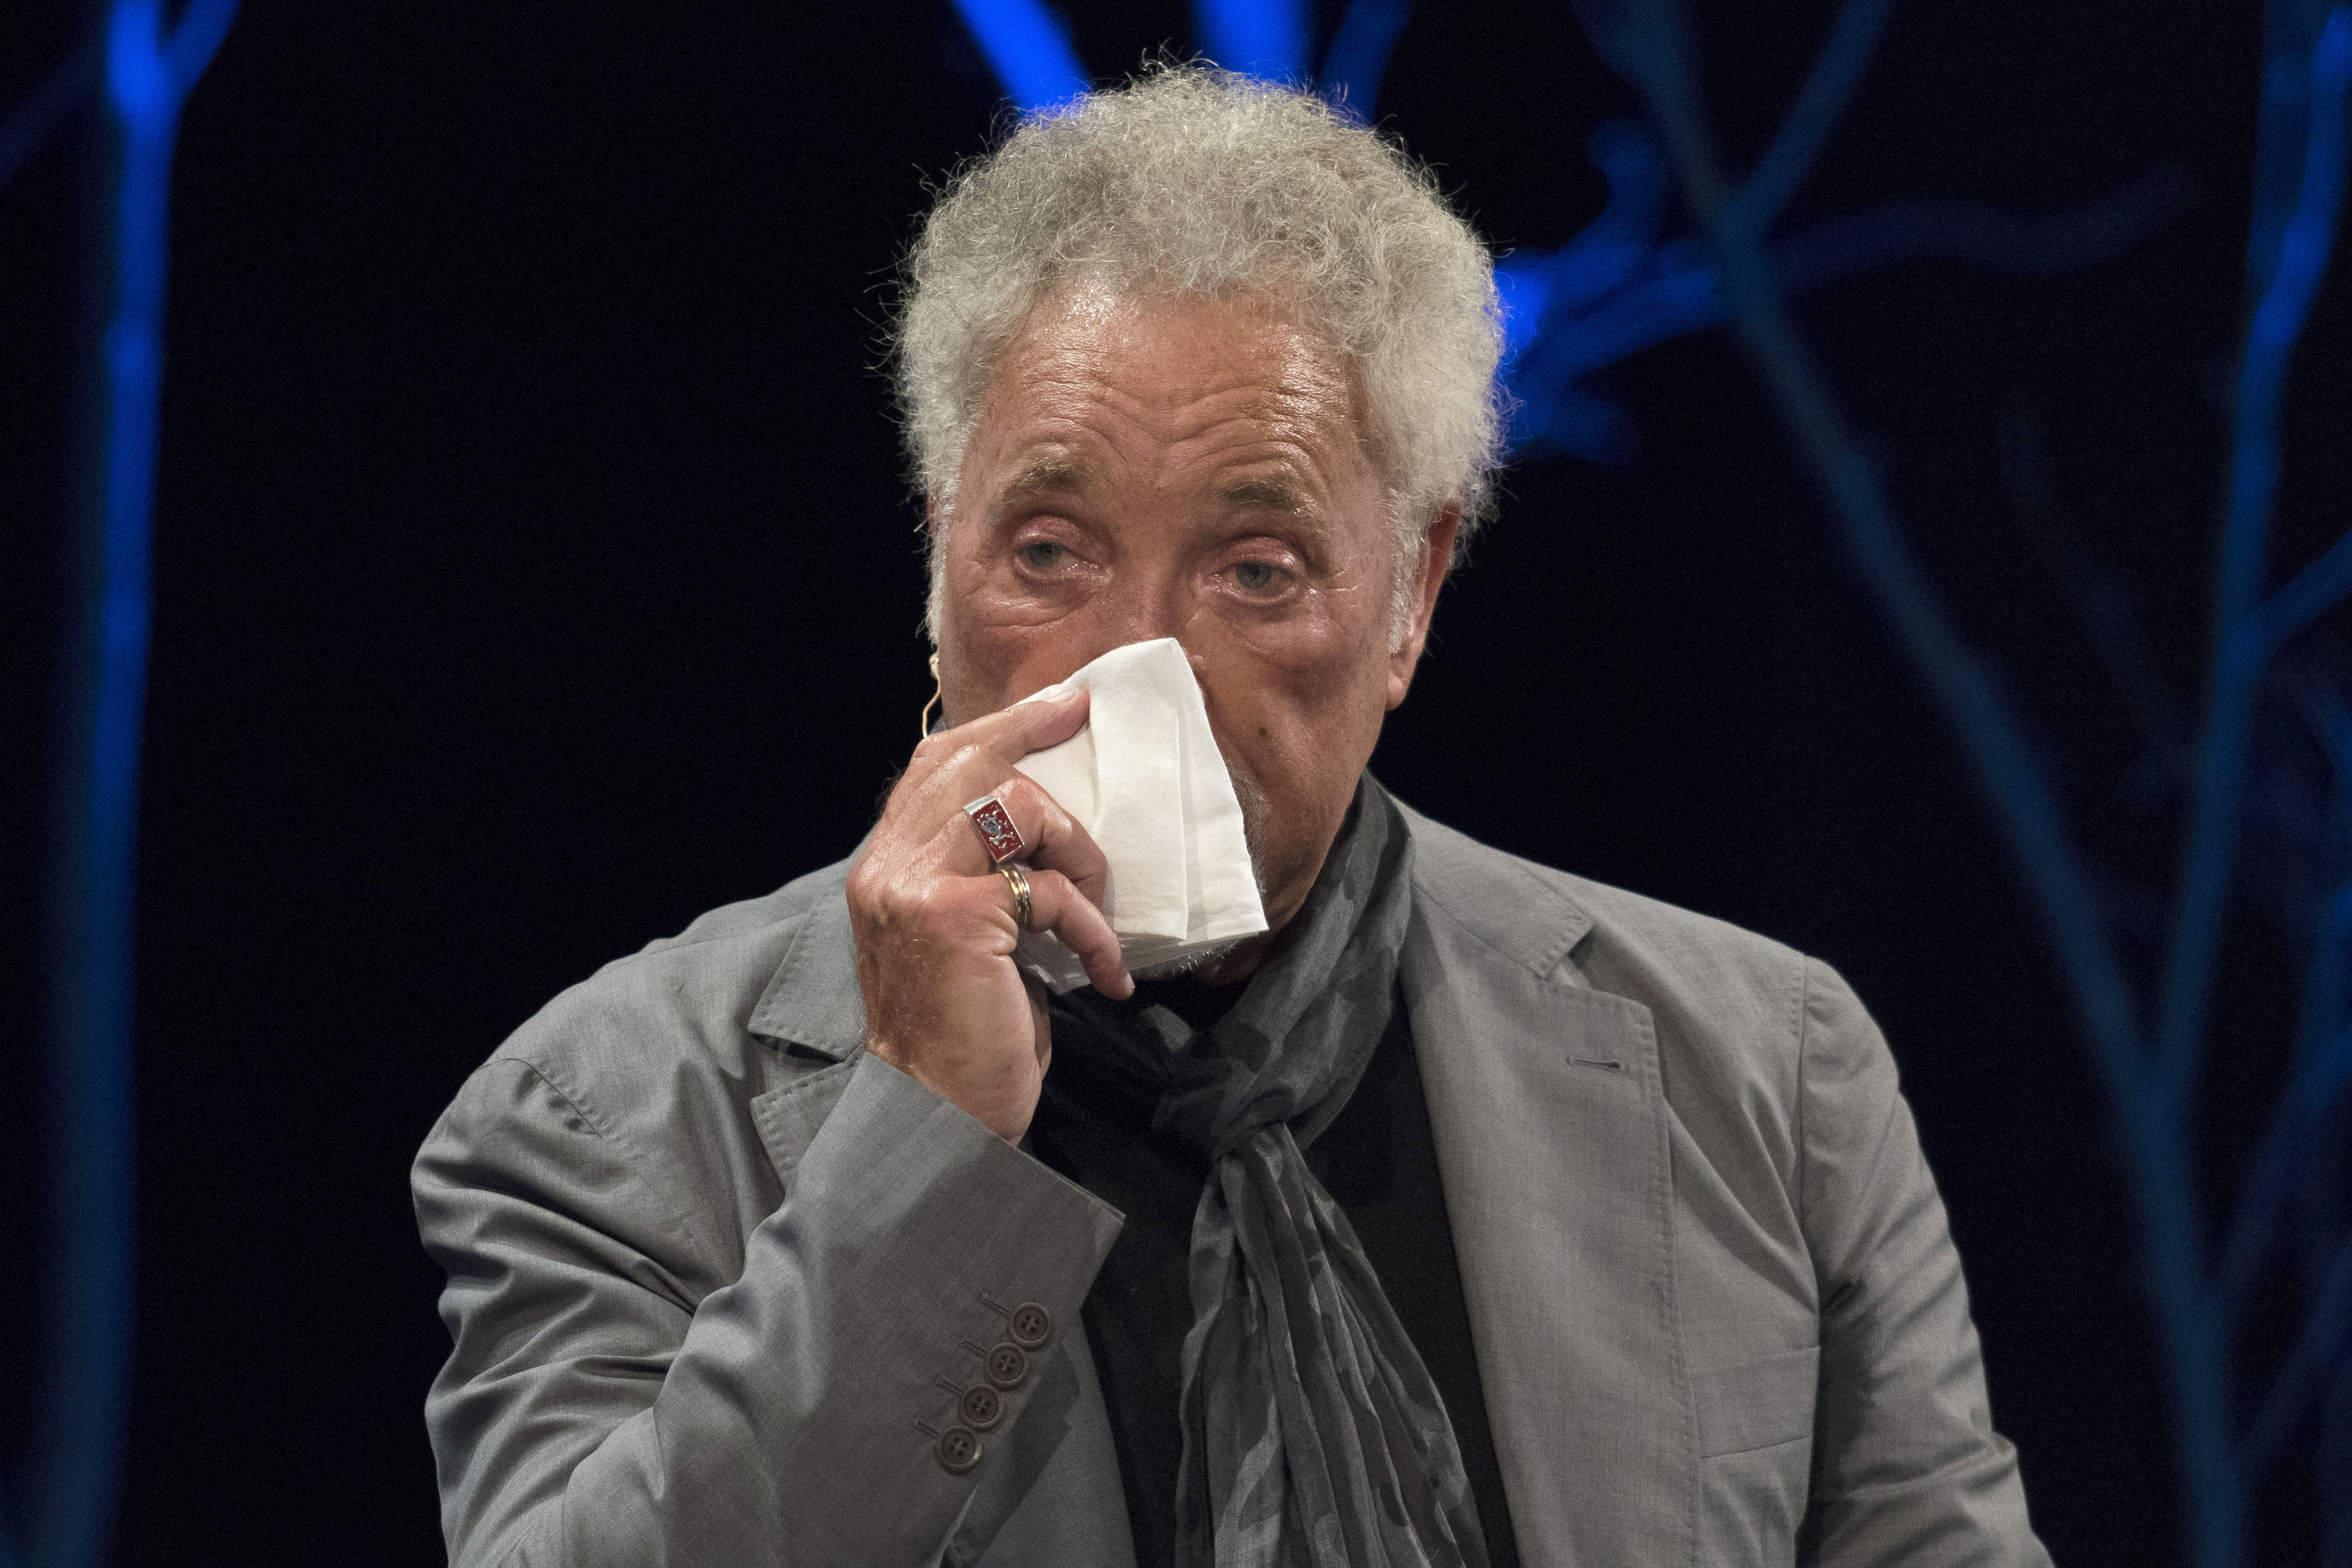 Tom Jones appears to fight back tears during the Hay Festival on June 5, 2016, in Hay-on-Wye, Wales. | Source: Getty Images